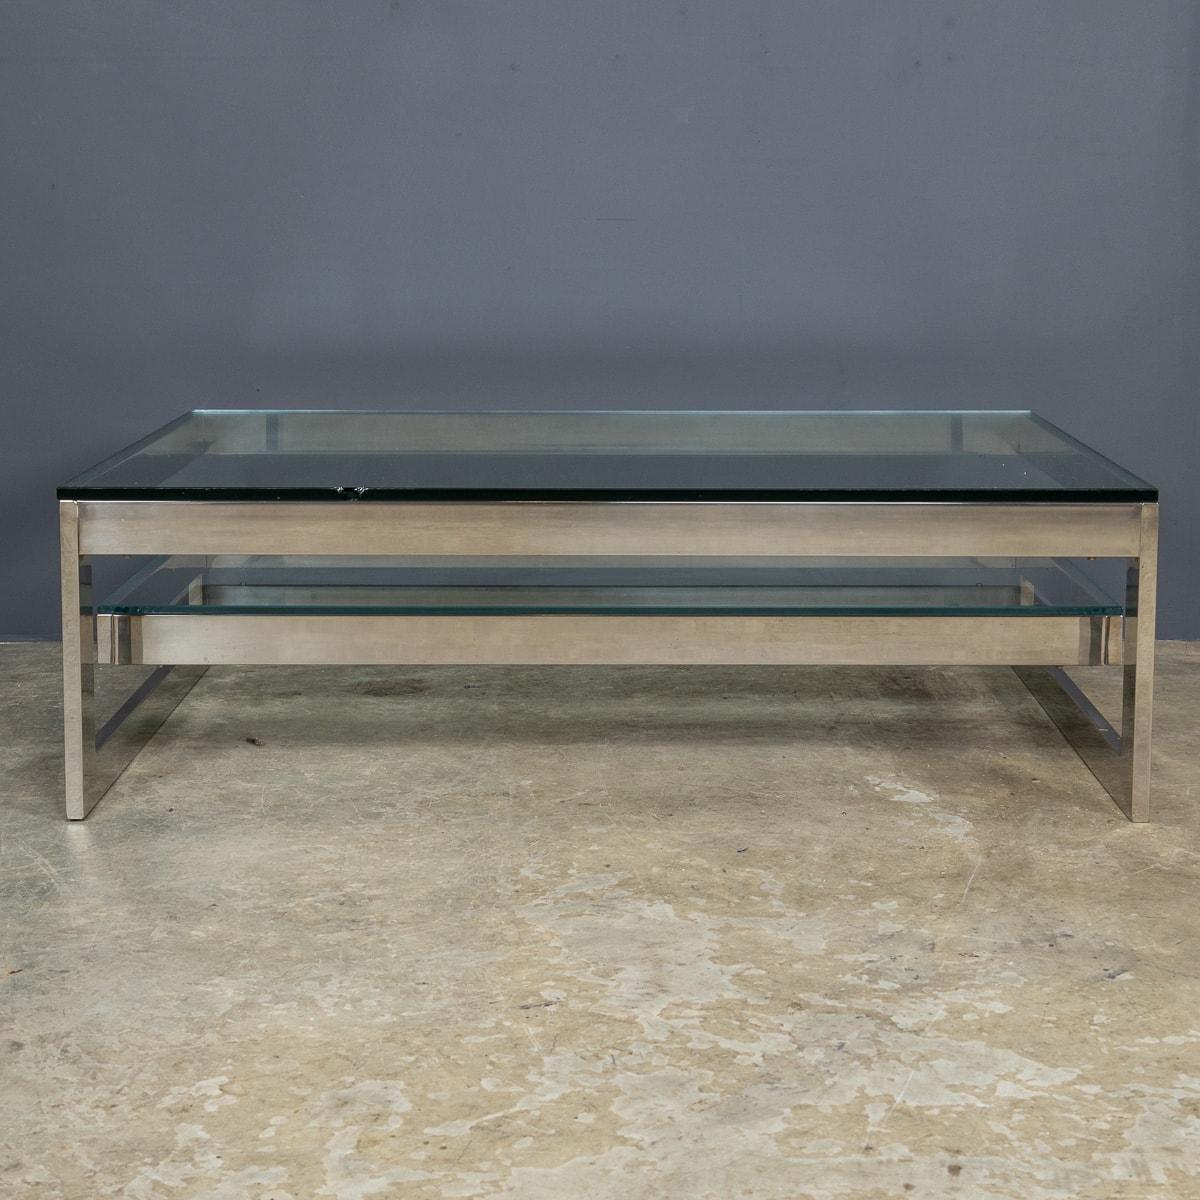 20th Century Polished Metal & Glass Coffee Table By Belgo Chrome, Belgium c.1970 In Good Condition For Sale In Royal Tunbridge Wells, Kent